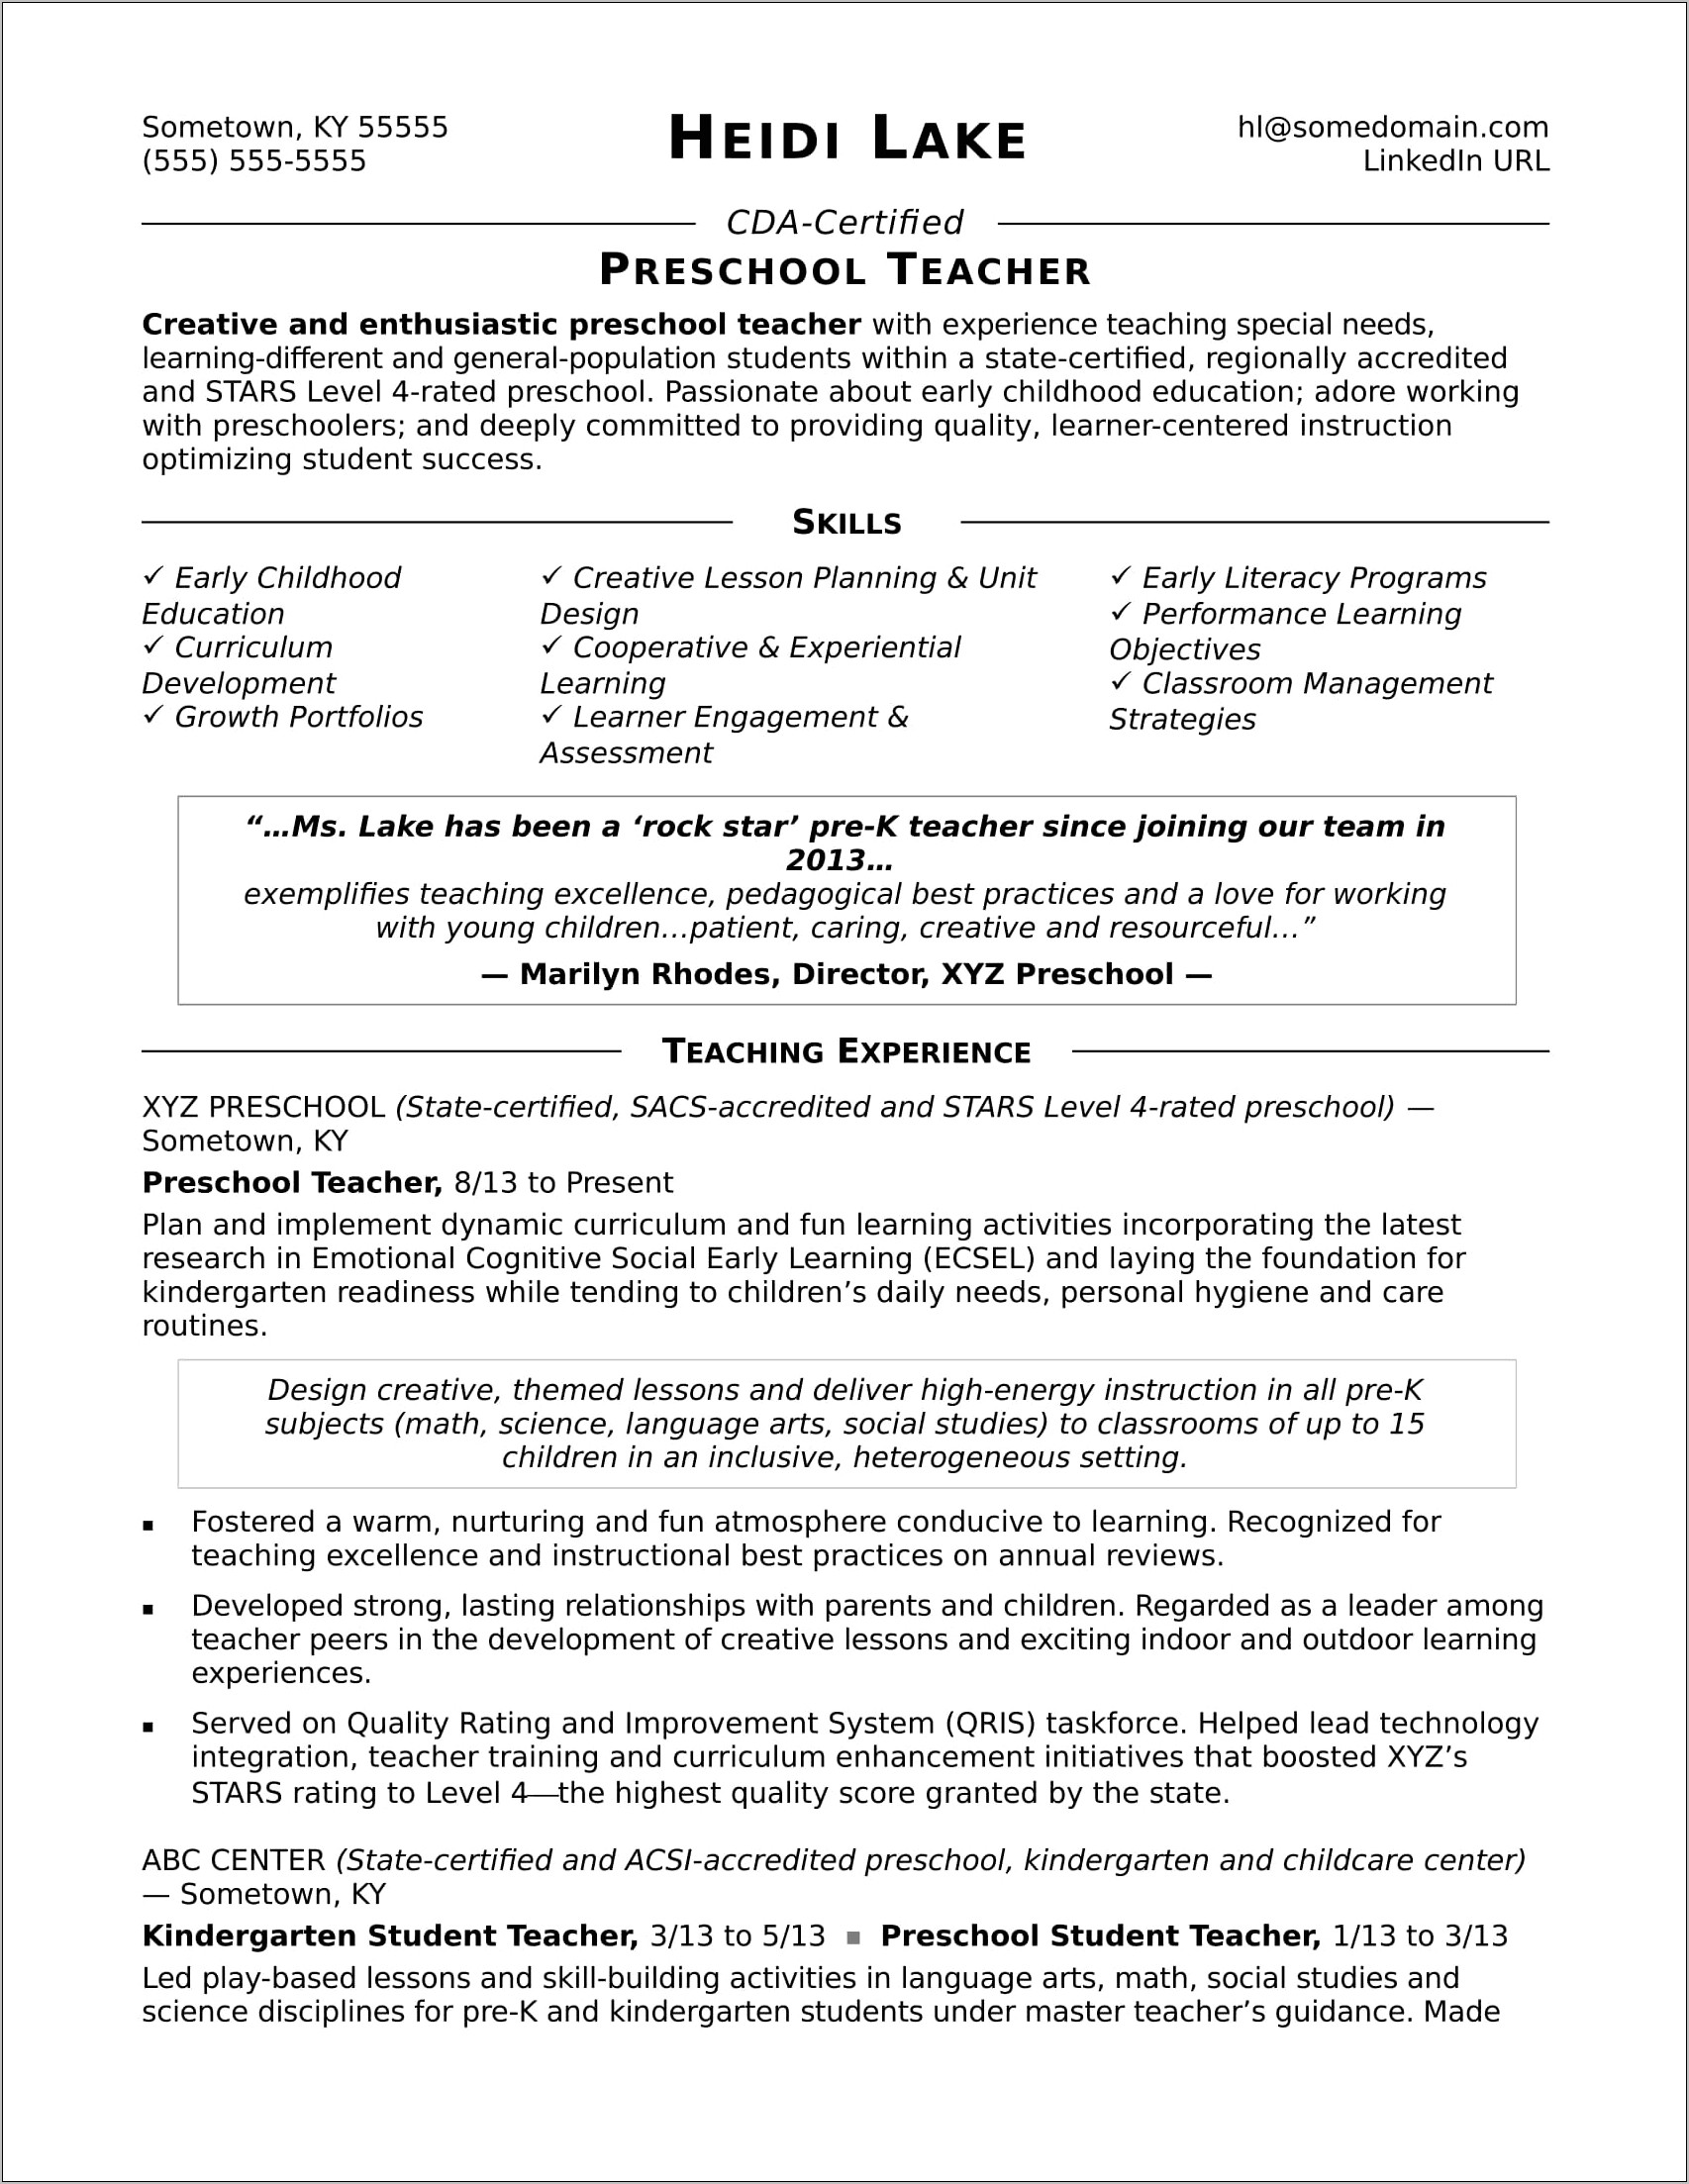 Sample Resumes With Personal Development